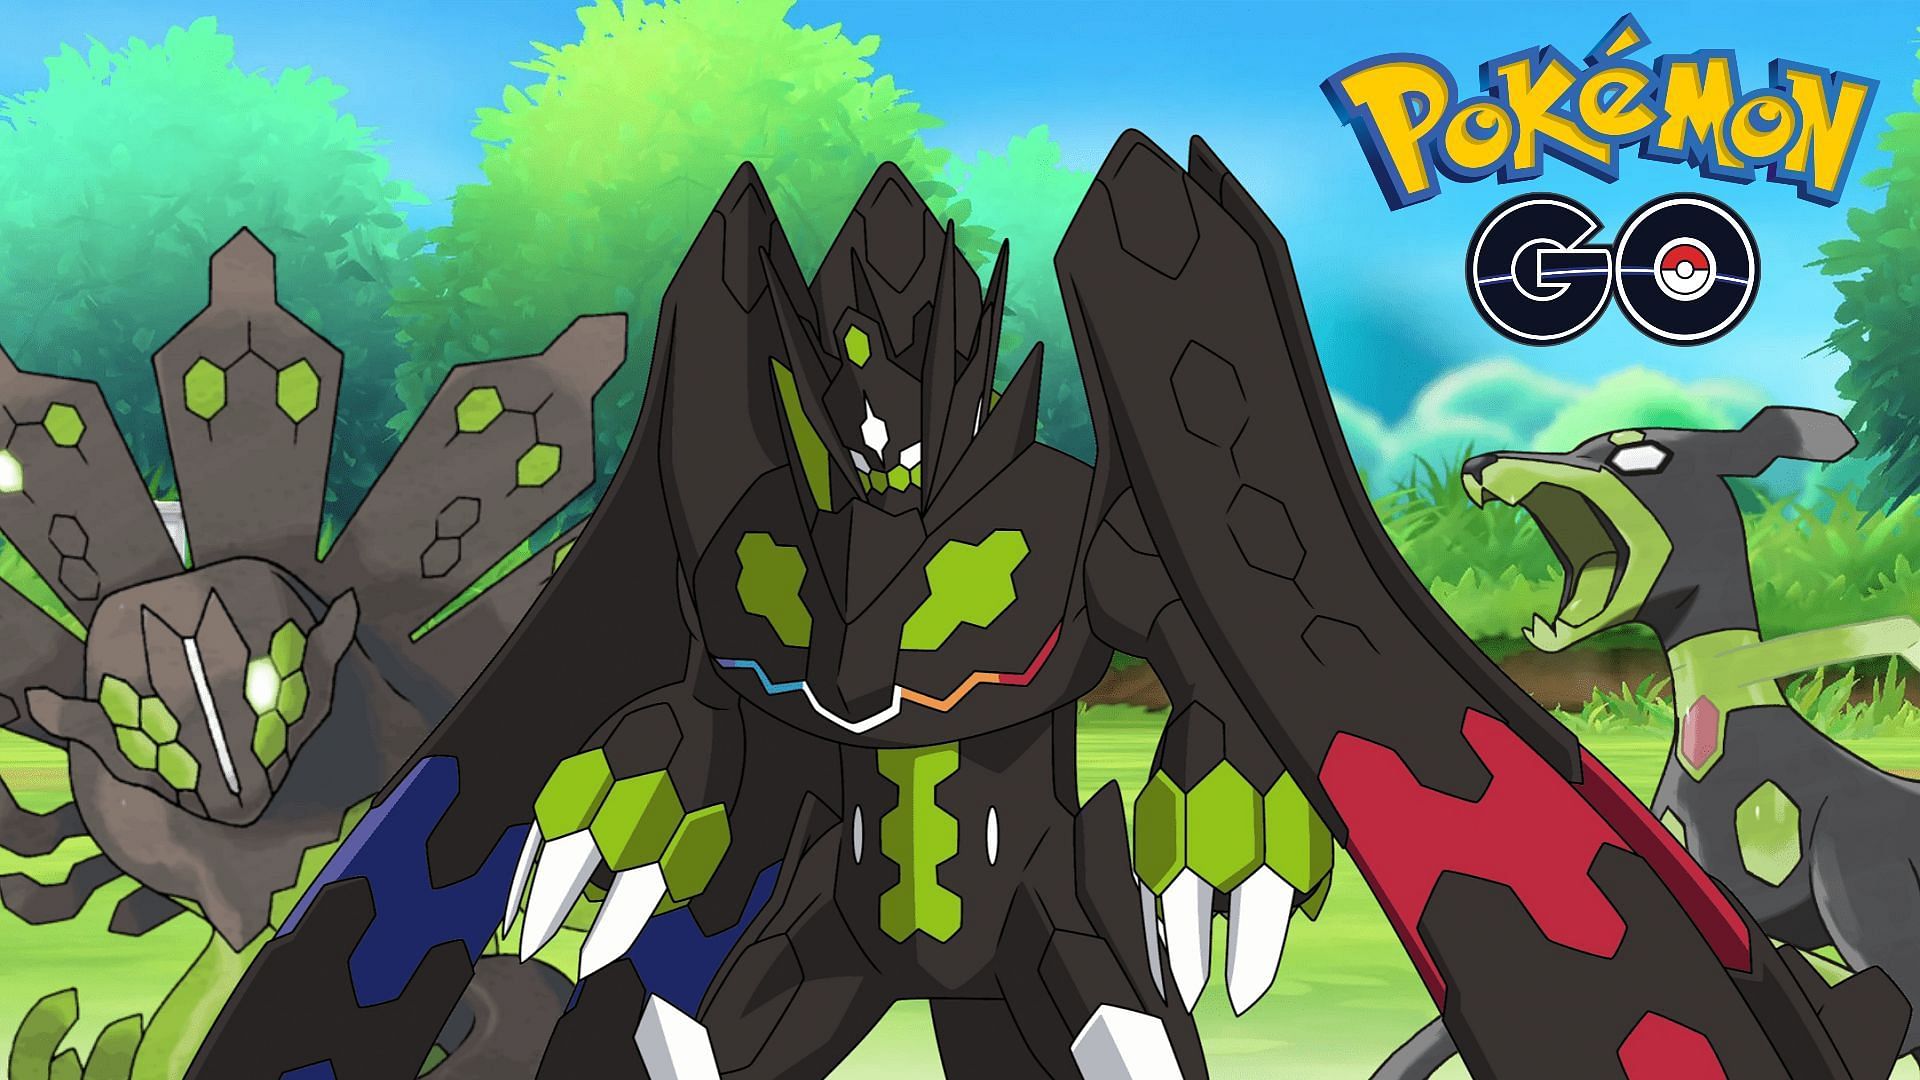 Zygarde is a Legendary Pokemon from the Kalos region that can change forms based on the cells that comprise its body.